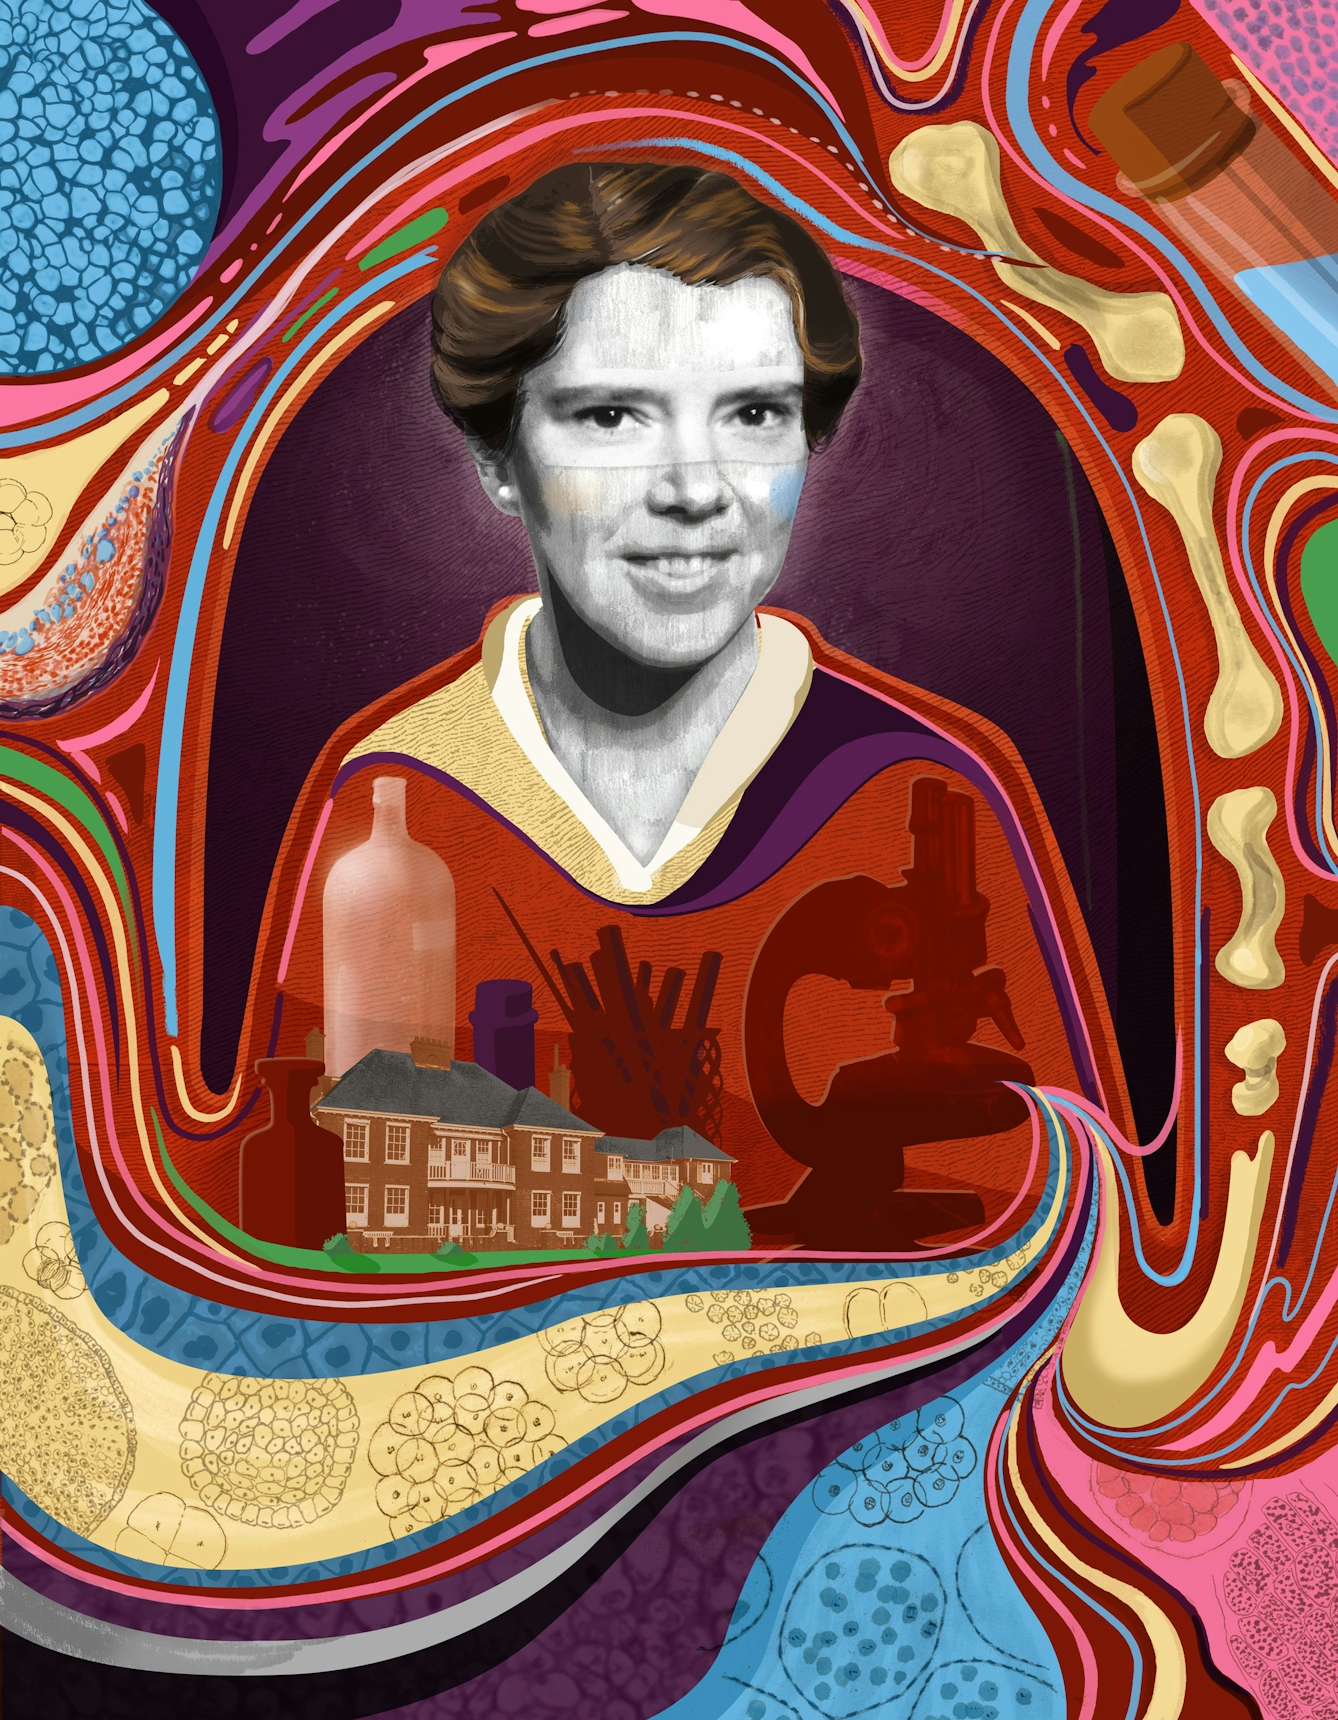 Illustration of Honor Fell, showing Strangeways laboratory and various laboratory equipment in the space where her torso would be. She is surrounded by swirling images of bones and illustrations of cells from her notebooks.